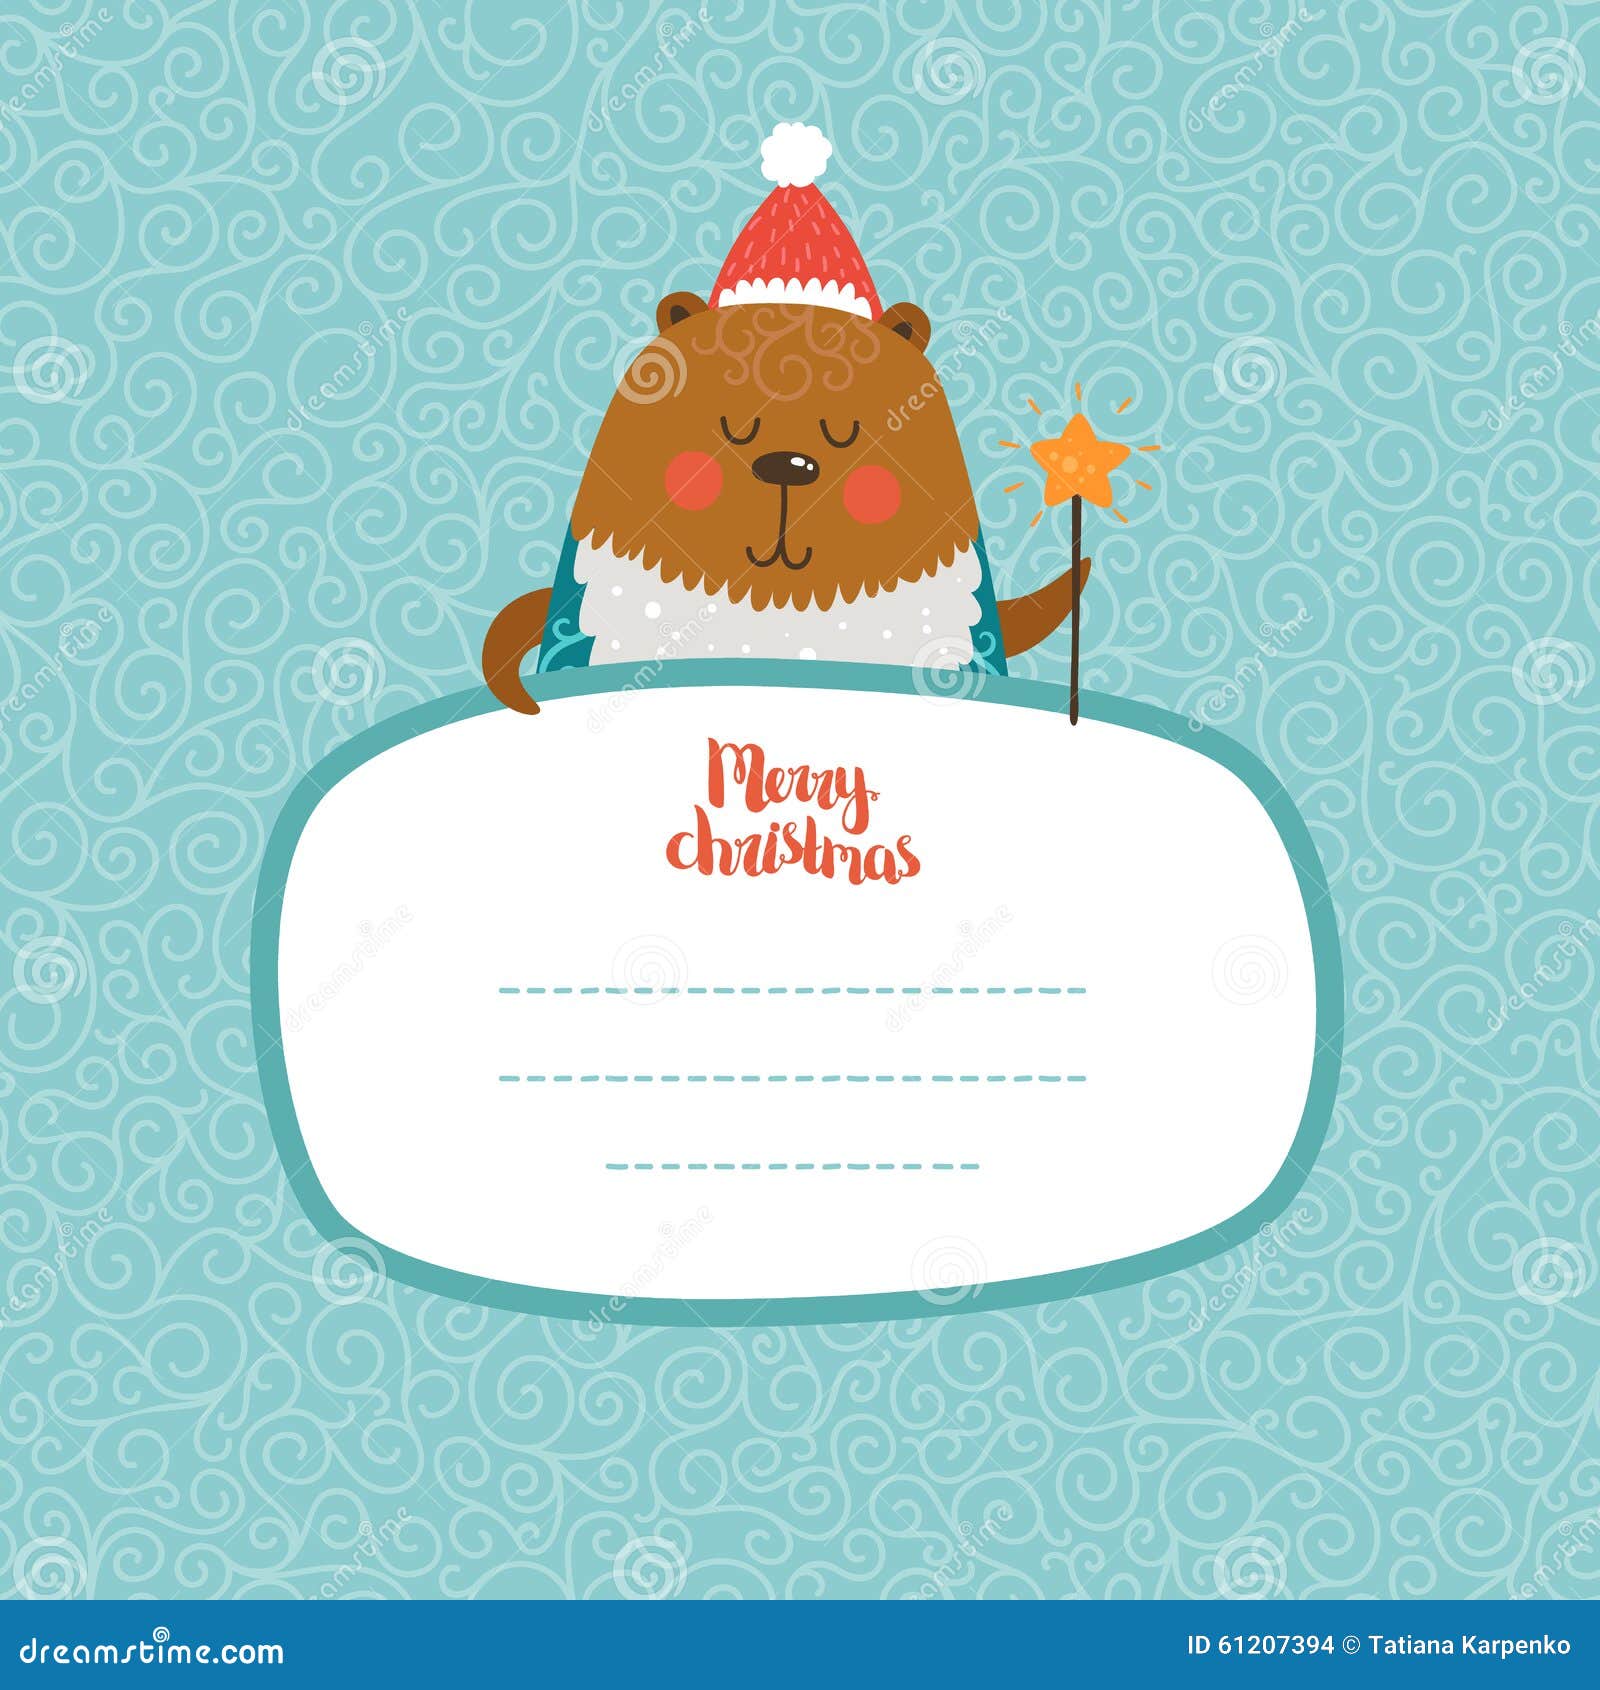 Merry Christmas and Happy New Year Card Stock Vector - Illustration of ...